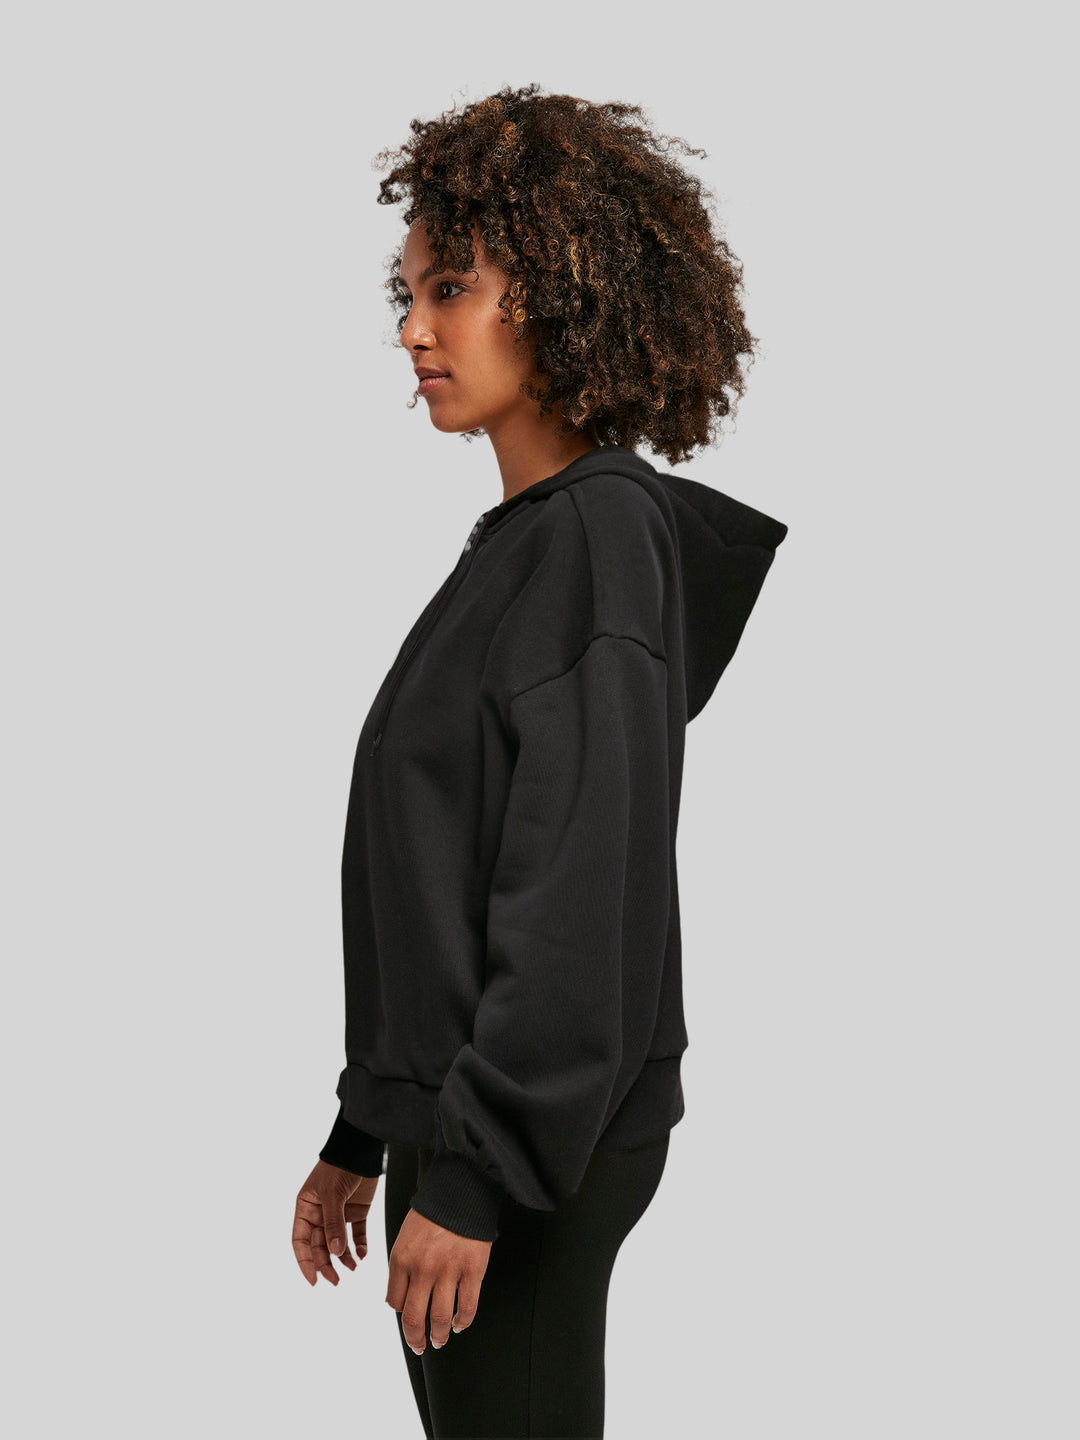 North Anchor with Ladies Organic Oversized Hoody